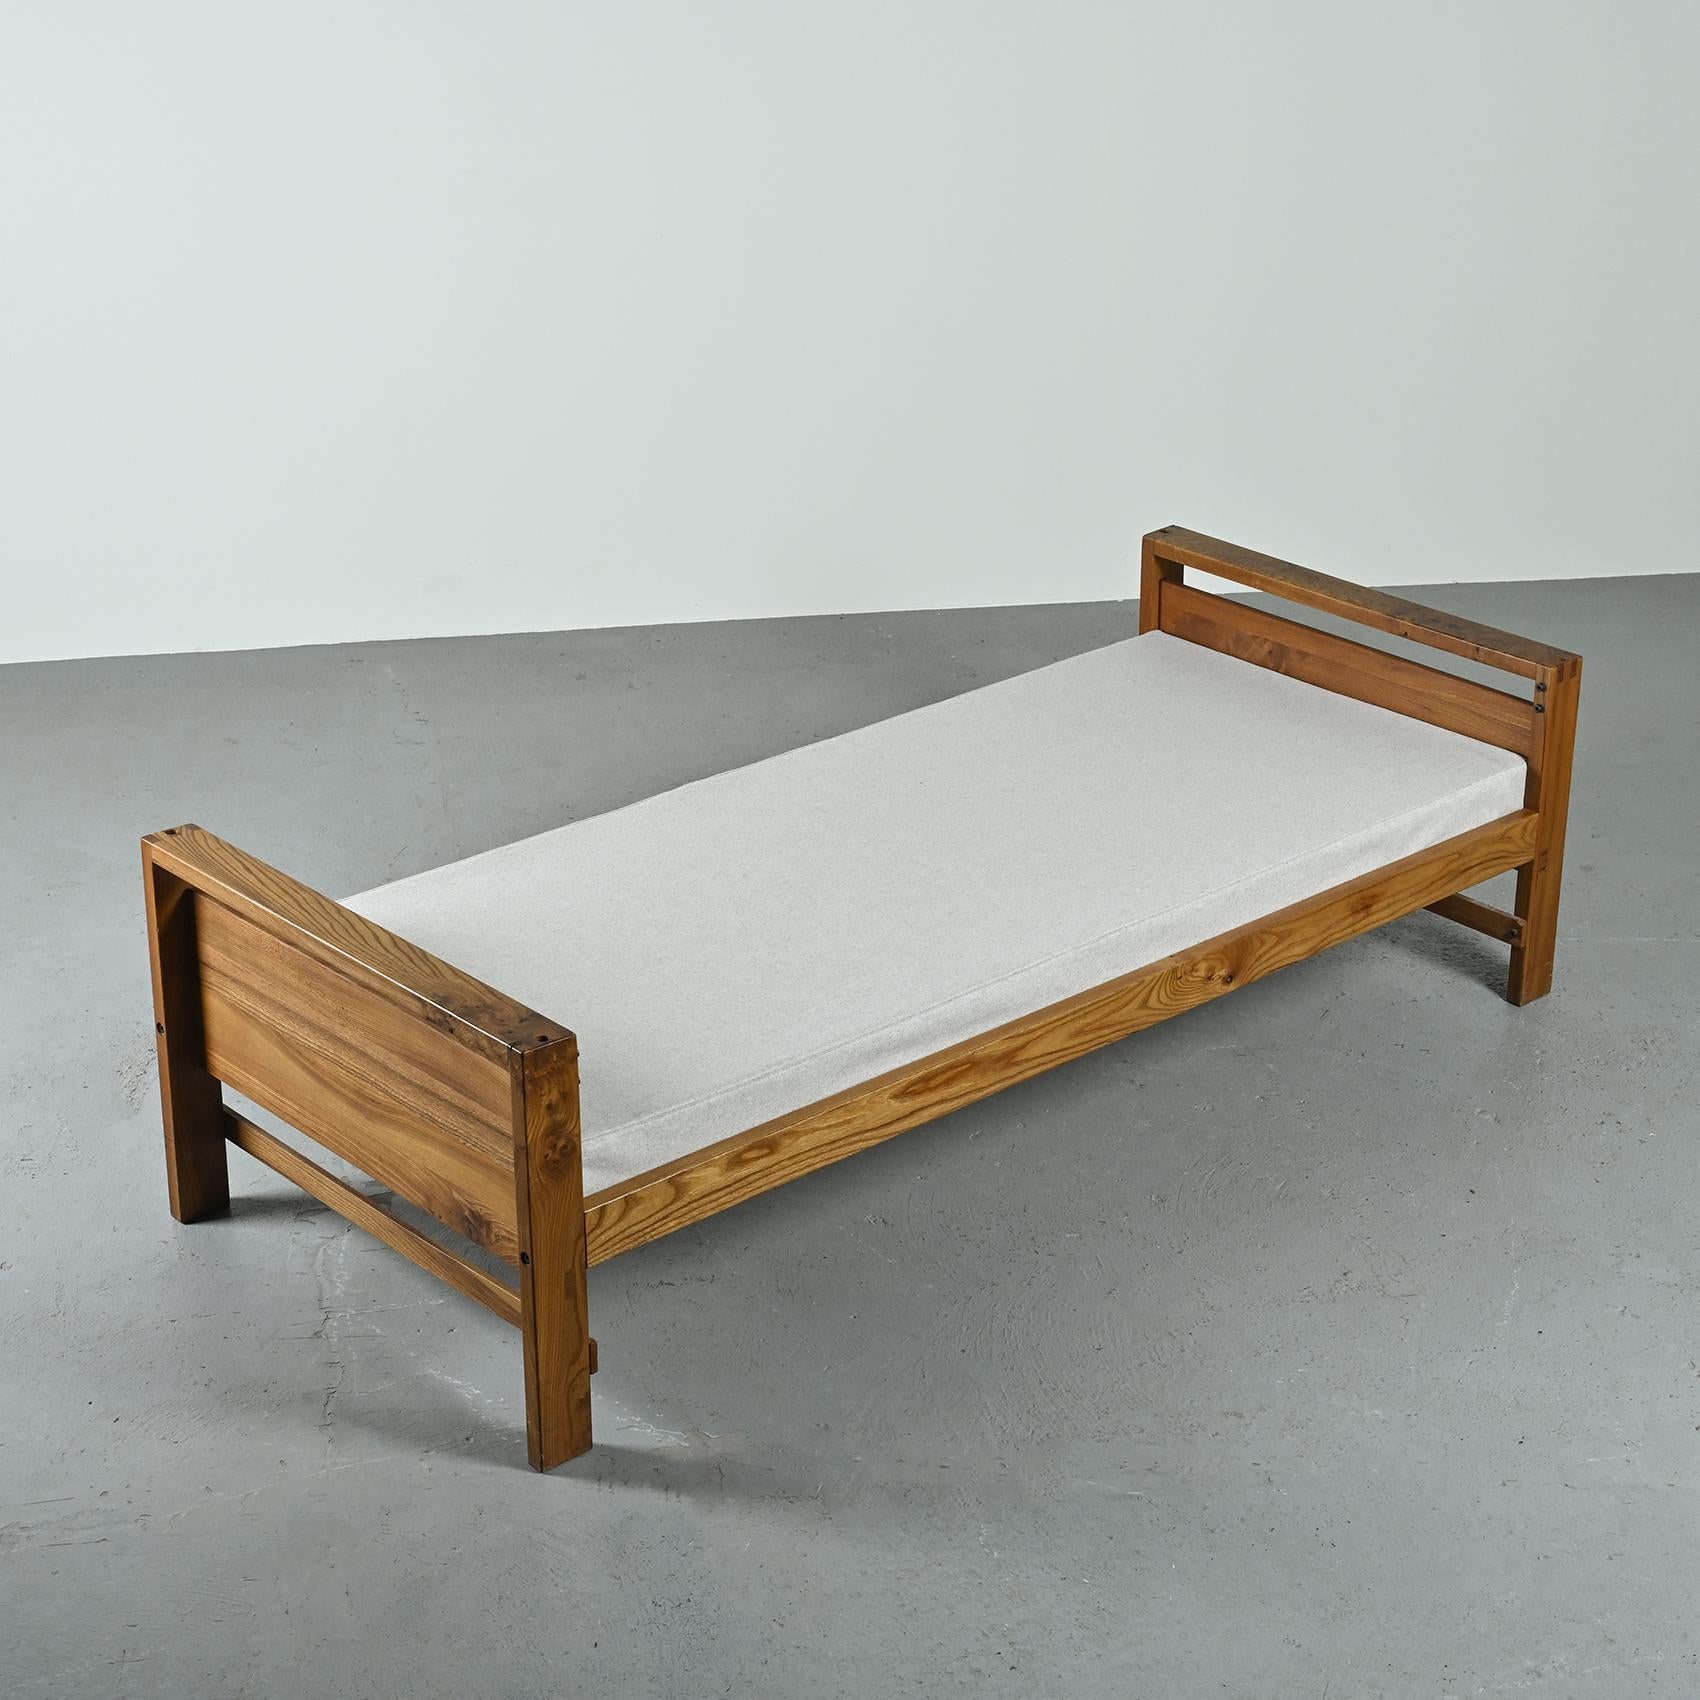 Introducing the Vintage daybed, model L06A, created by the renowned Pierre Chapo.

This piece embodies simplicity at its finest, boasting a frame crafted entirely from solid elm and adorned with box joint mounts. Thanks to its versatile design, it